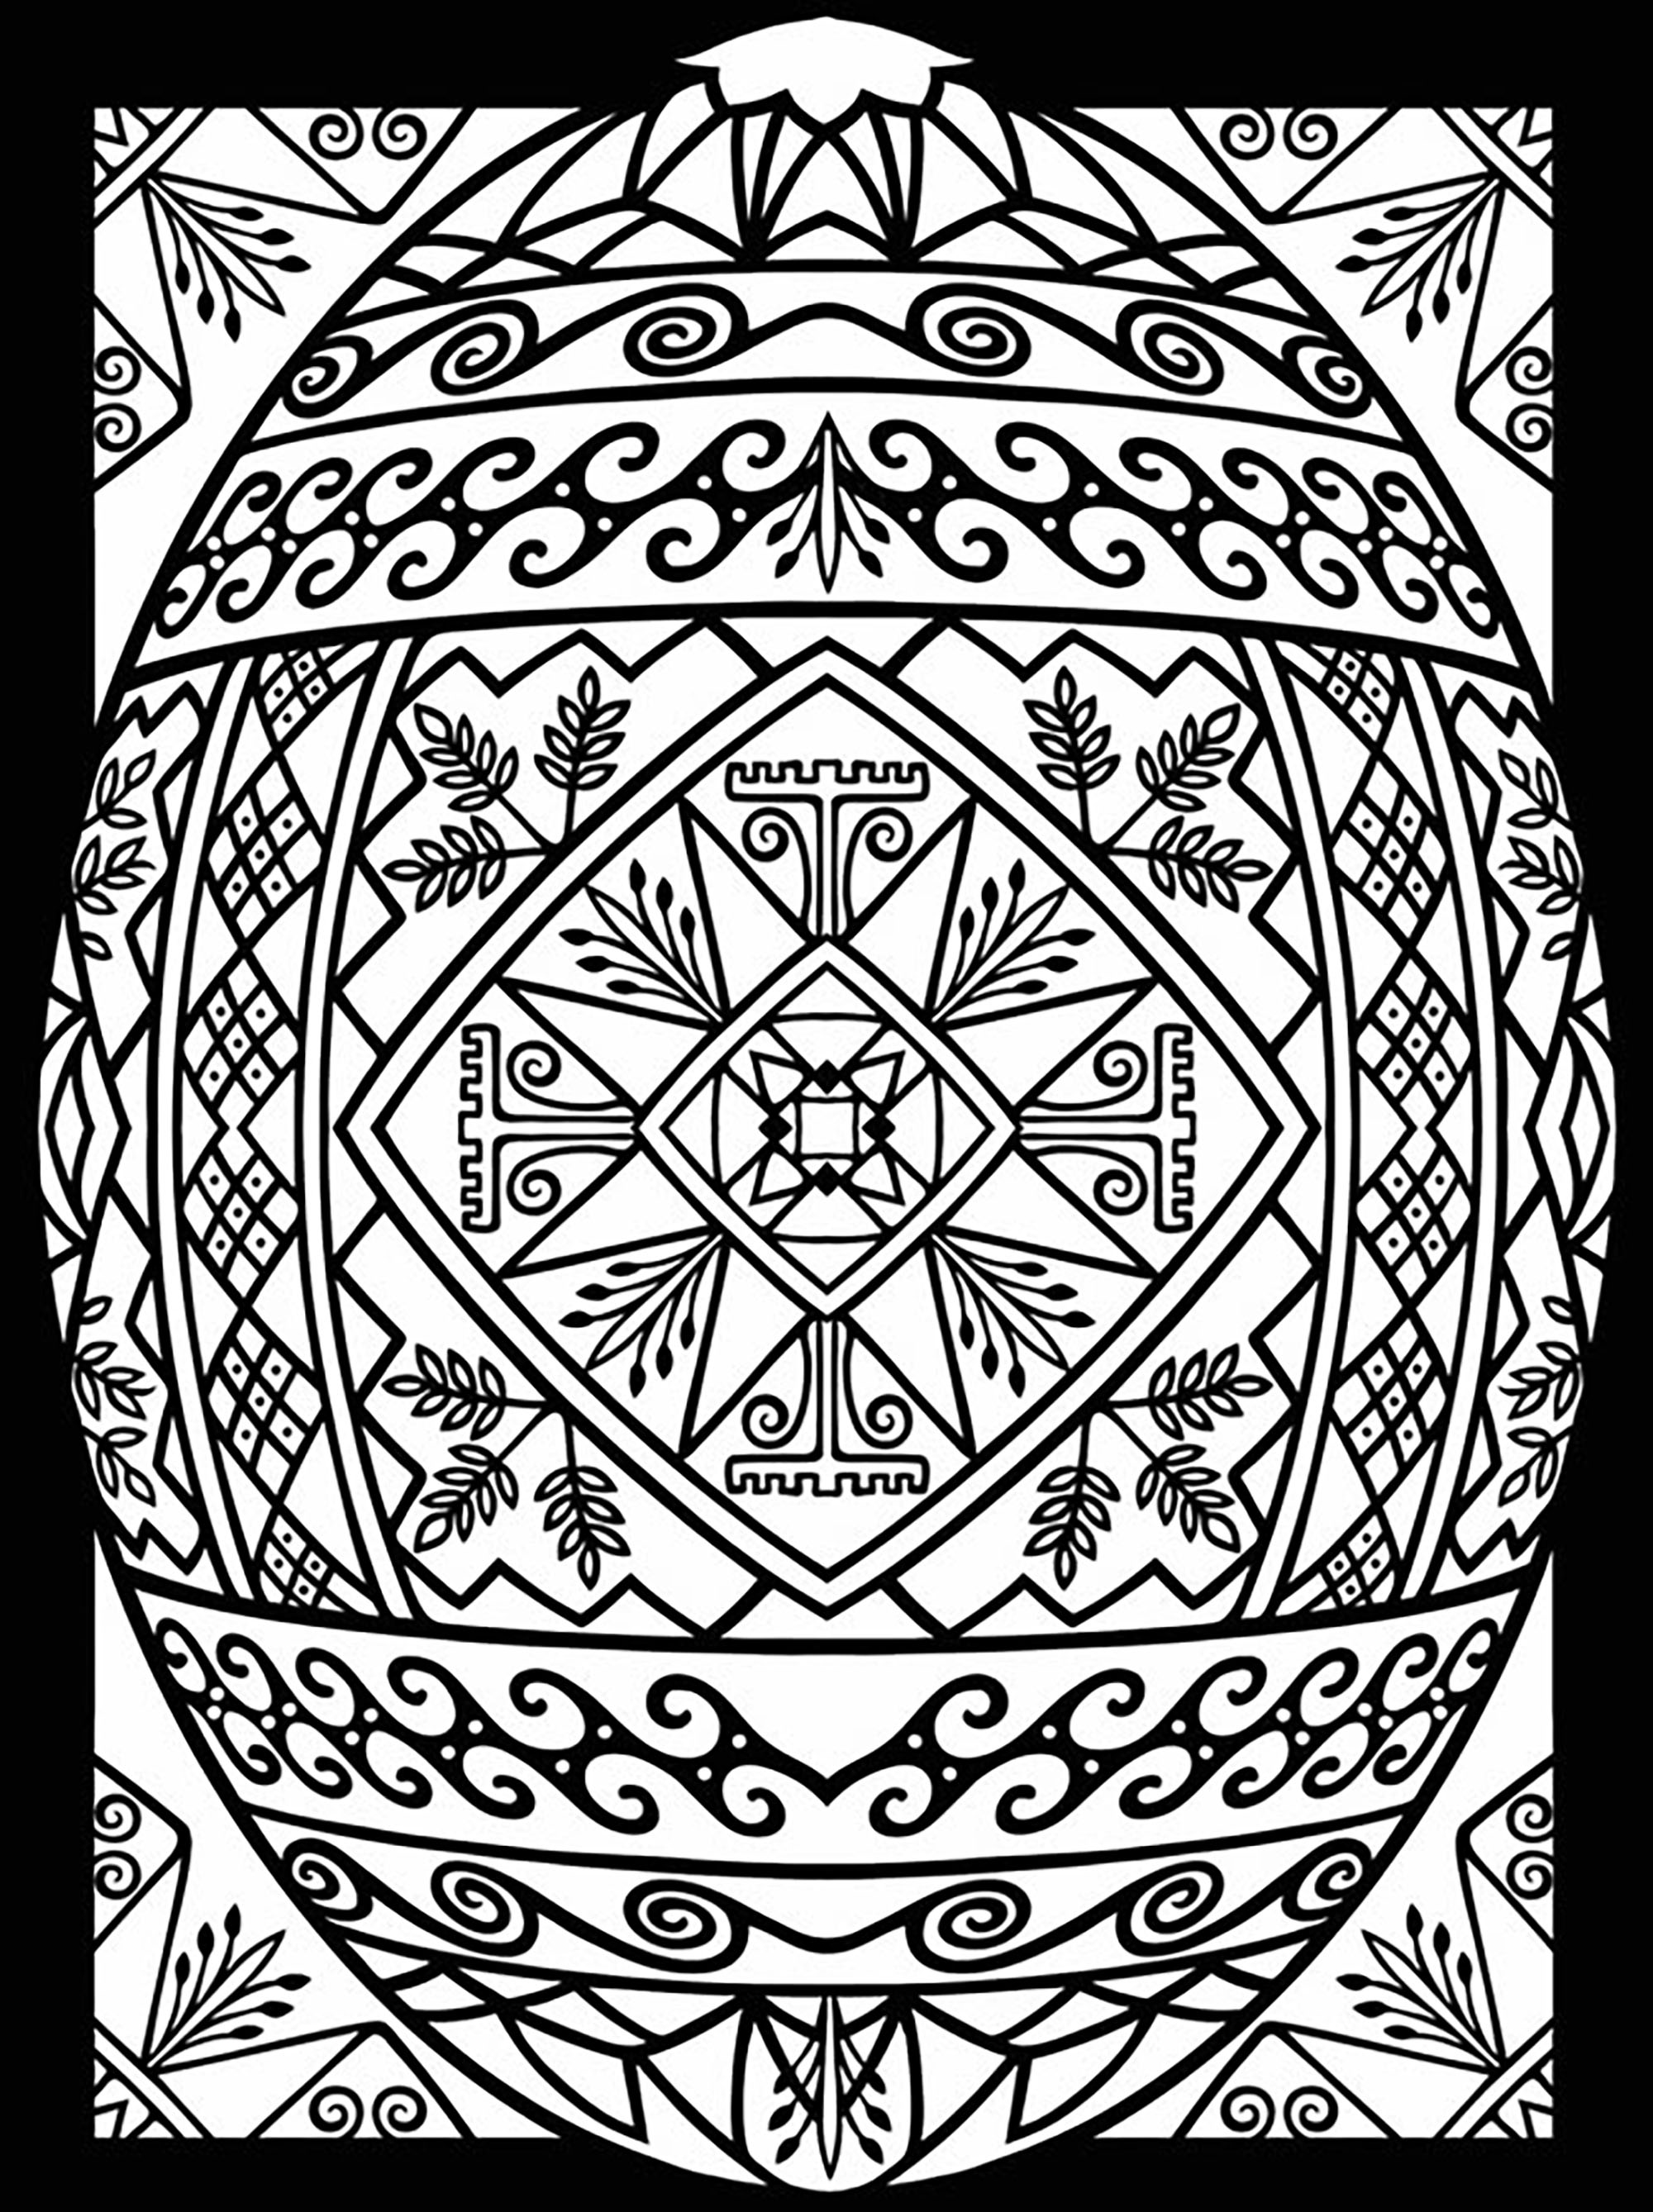 Download Easter eggs with abstract patterns - Easter Adult Coloring ...